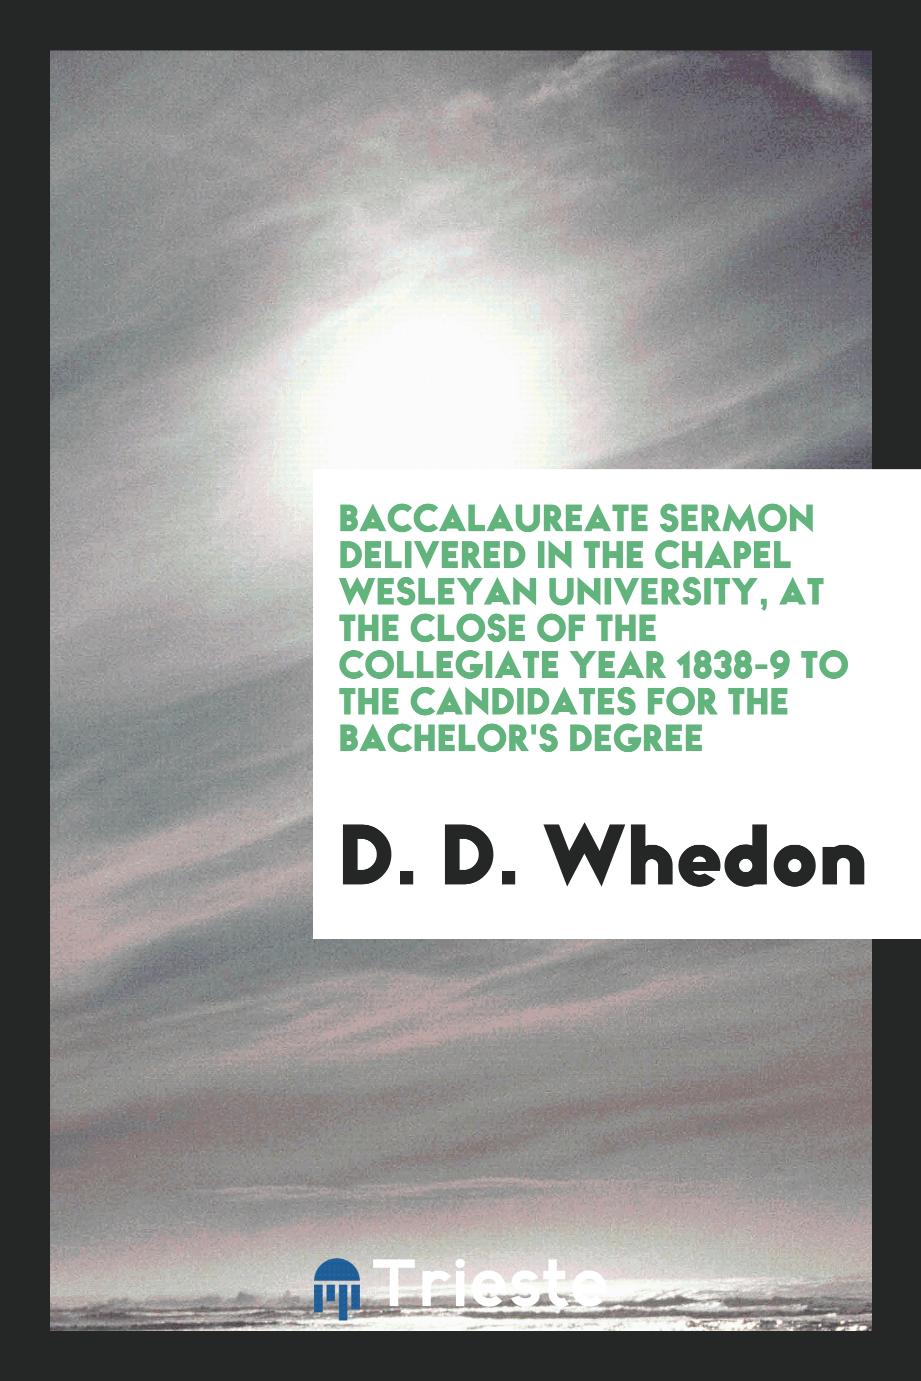 Baccalaureate Sermon Delivered in the Chapel Wesleyan University, at the close of the collegiate year 1838-9 to the candidates for the bachelor's degree